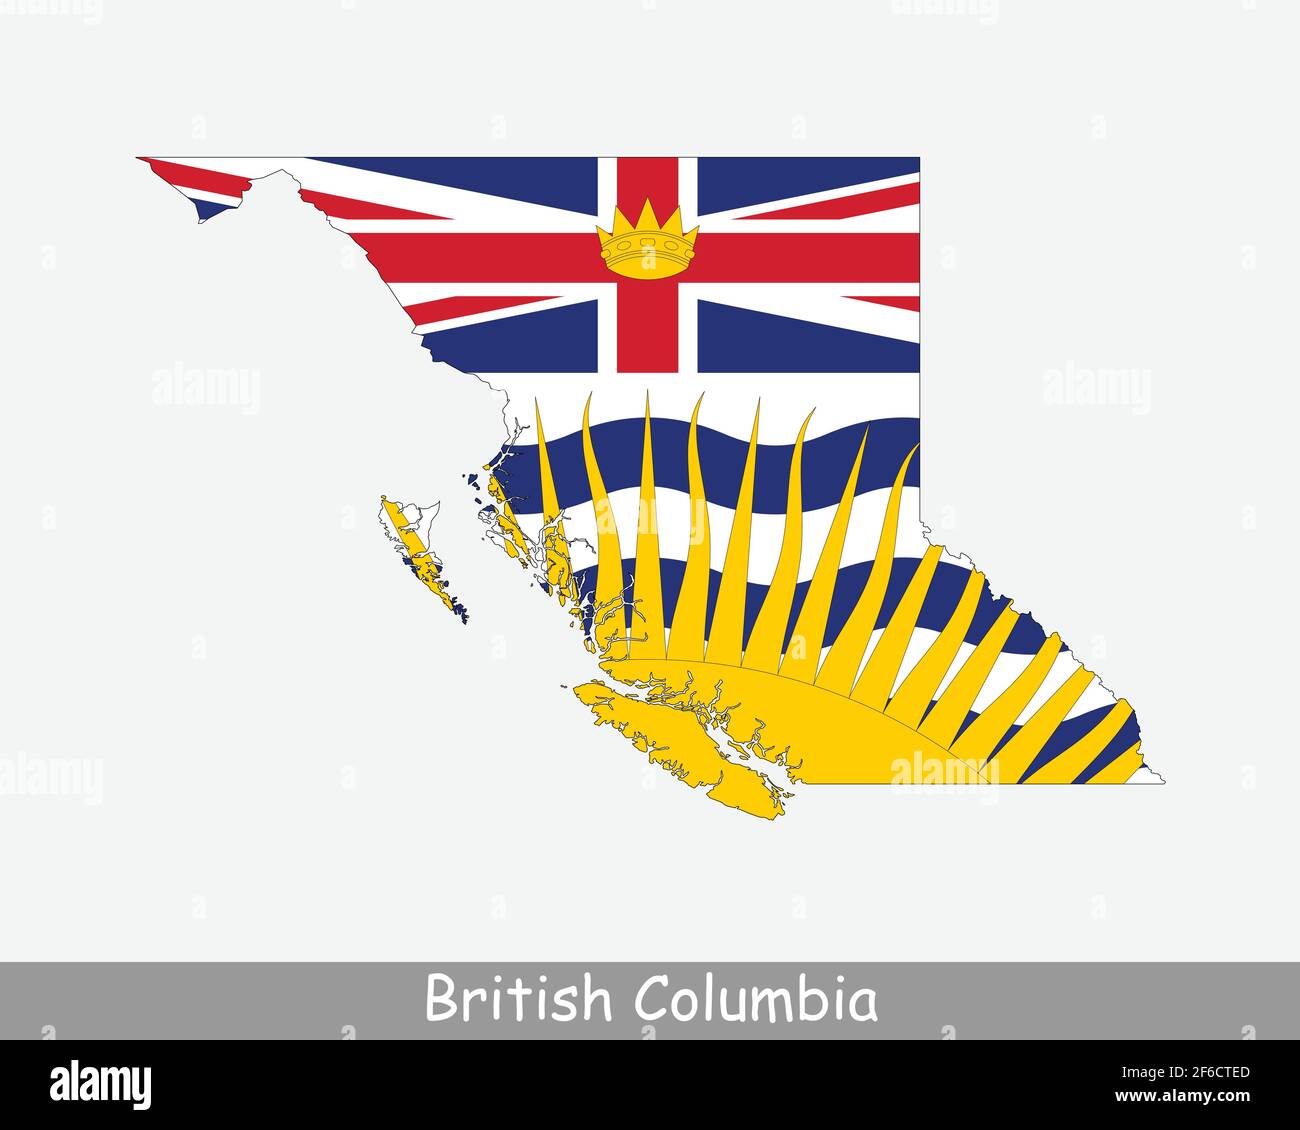 British Columbia Map Flag. Map of British Columbia Canada with flag isolated on white background. Canadian Province. Vector illustration. Stock Vector